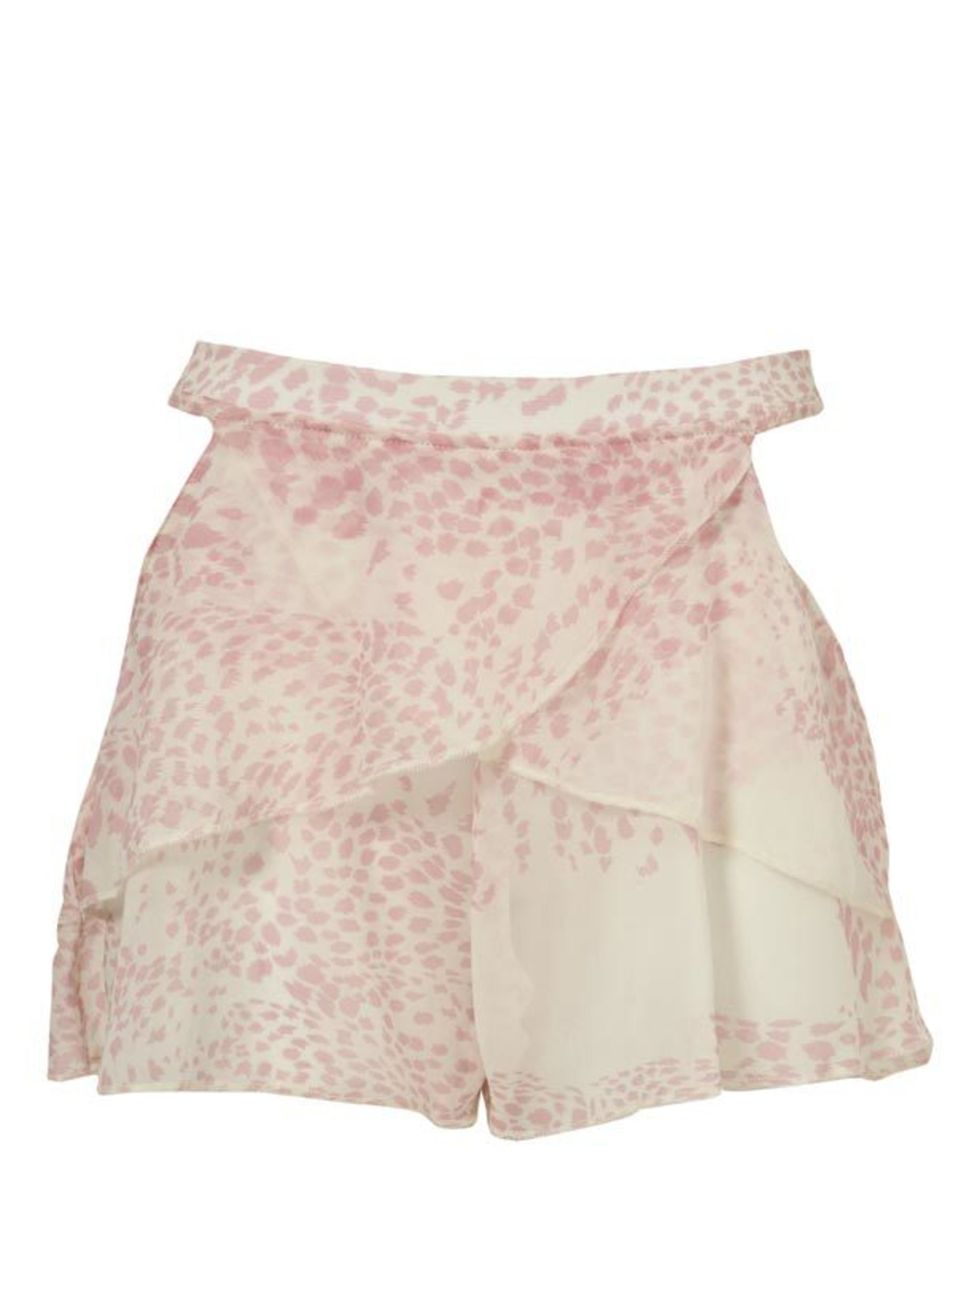 <p> </p><p>Liven up your underwear drawer with these colourfully quirky shorts from New Gen designer Danielle Scutts new capsule collection for Topshop Danielle Scutt leaoprd print shorts, £45, at <a href="http://www.topshop.com/webapp/wcs/stores/servle